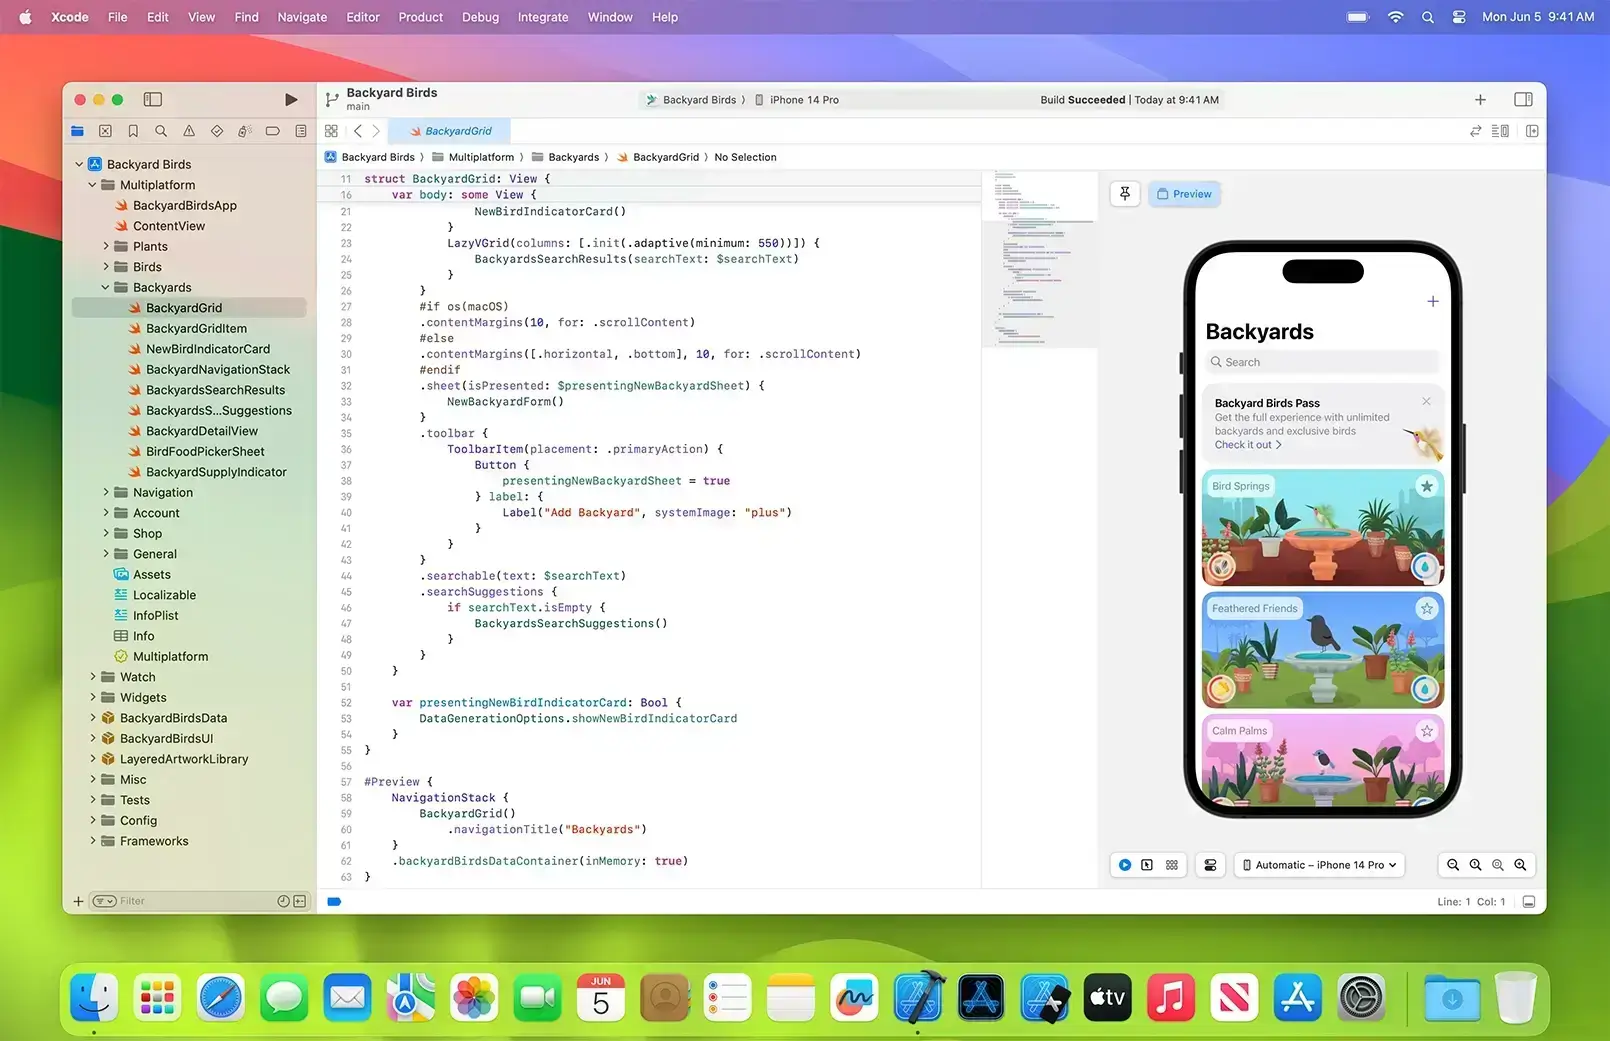 Xcode is a software package developed